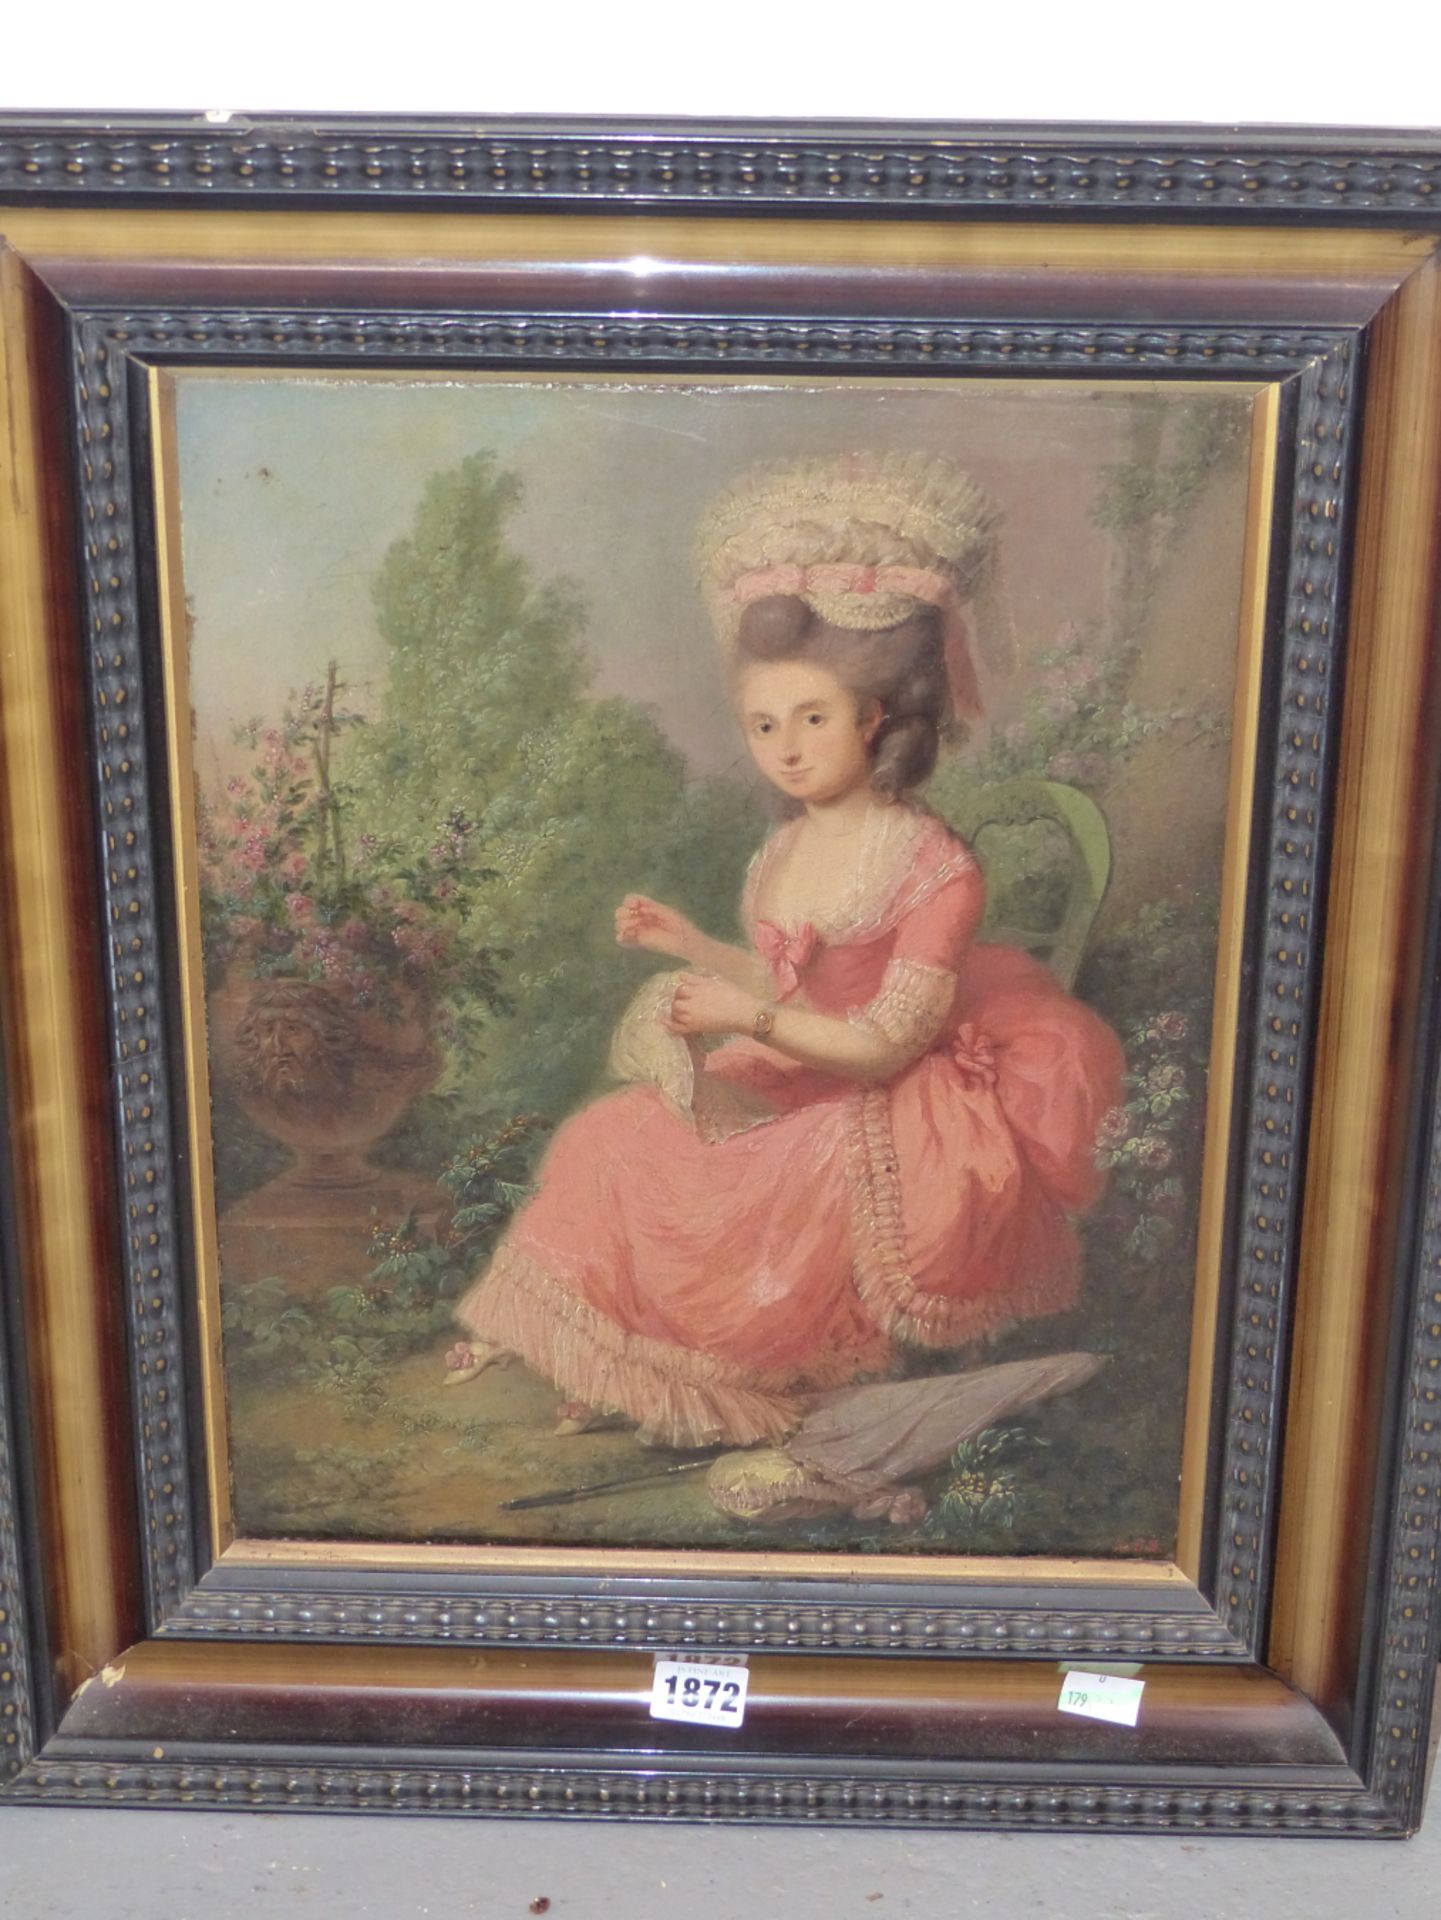 CIRCLE OF JEAN FREDERIC SCHALL (1752-1825), A LADY WEARING A PINK DRESS SEATED IN A GARDEN SEWING, - Image 2 of 5